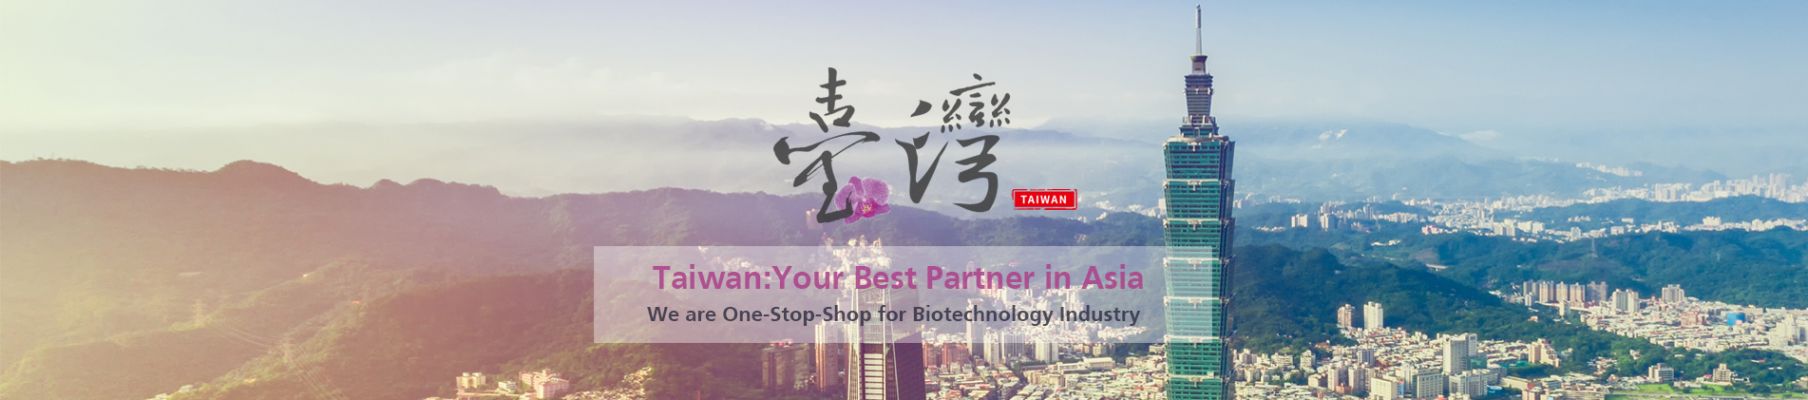 Taiwan：Your Best Partner in Asia